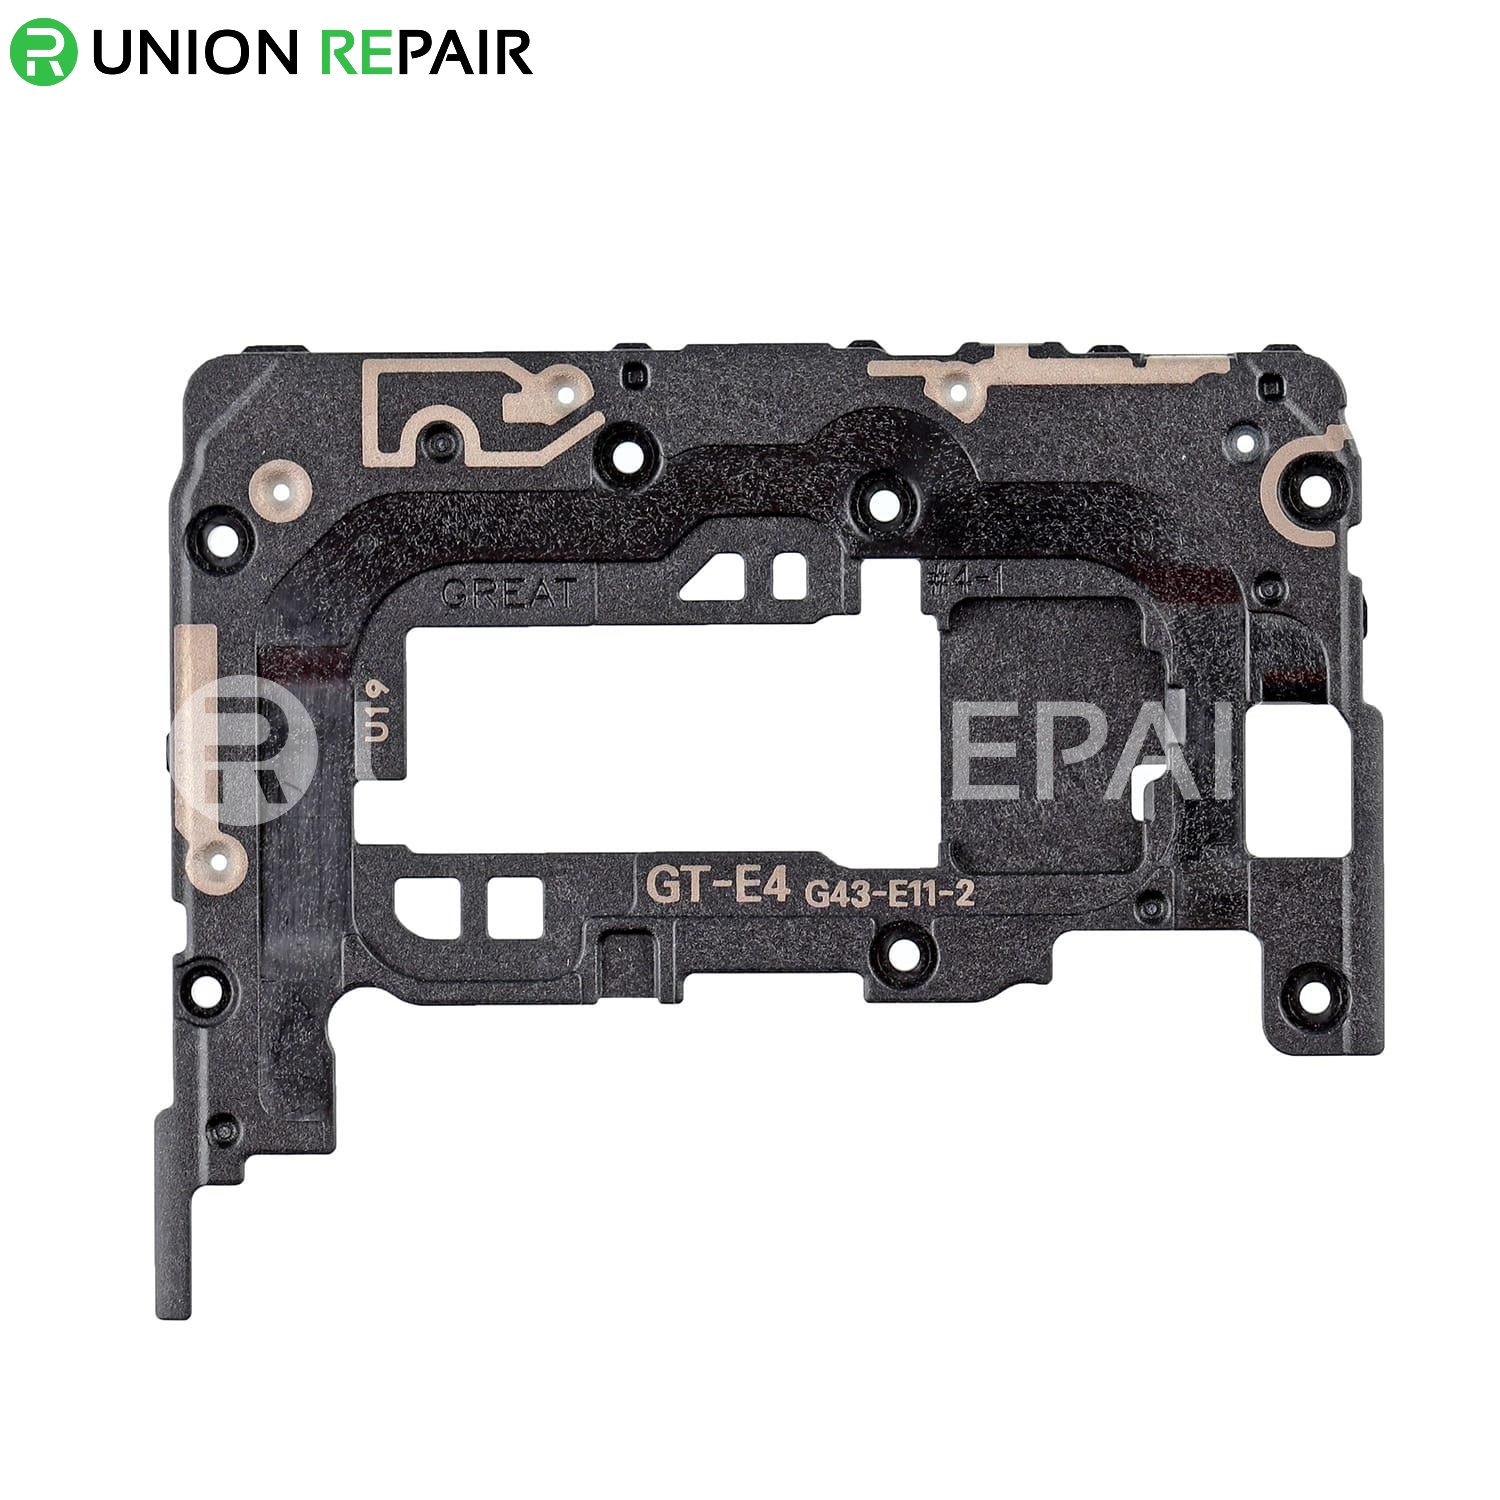 Replacement for Samsung Galaxy Note 8 Motherboard Protective Cover